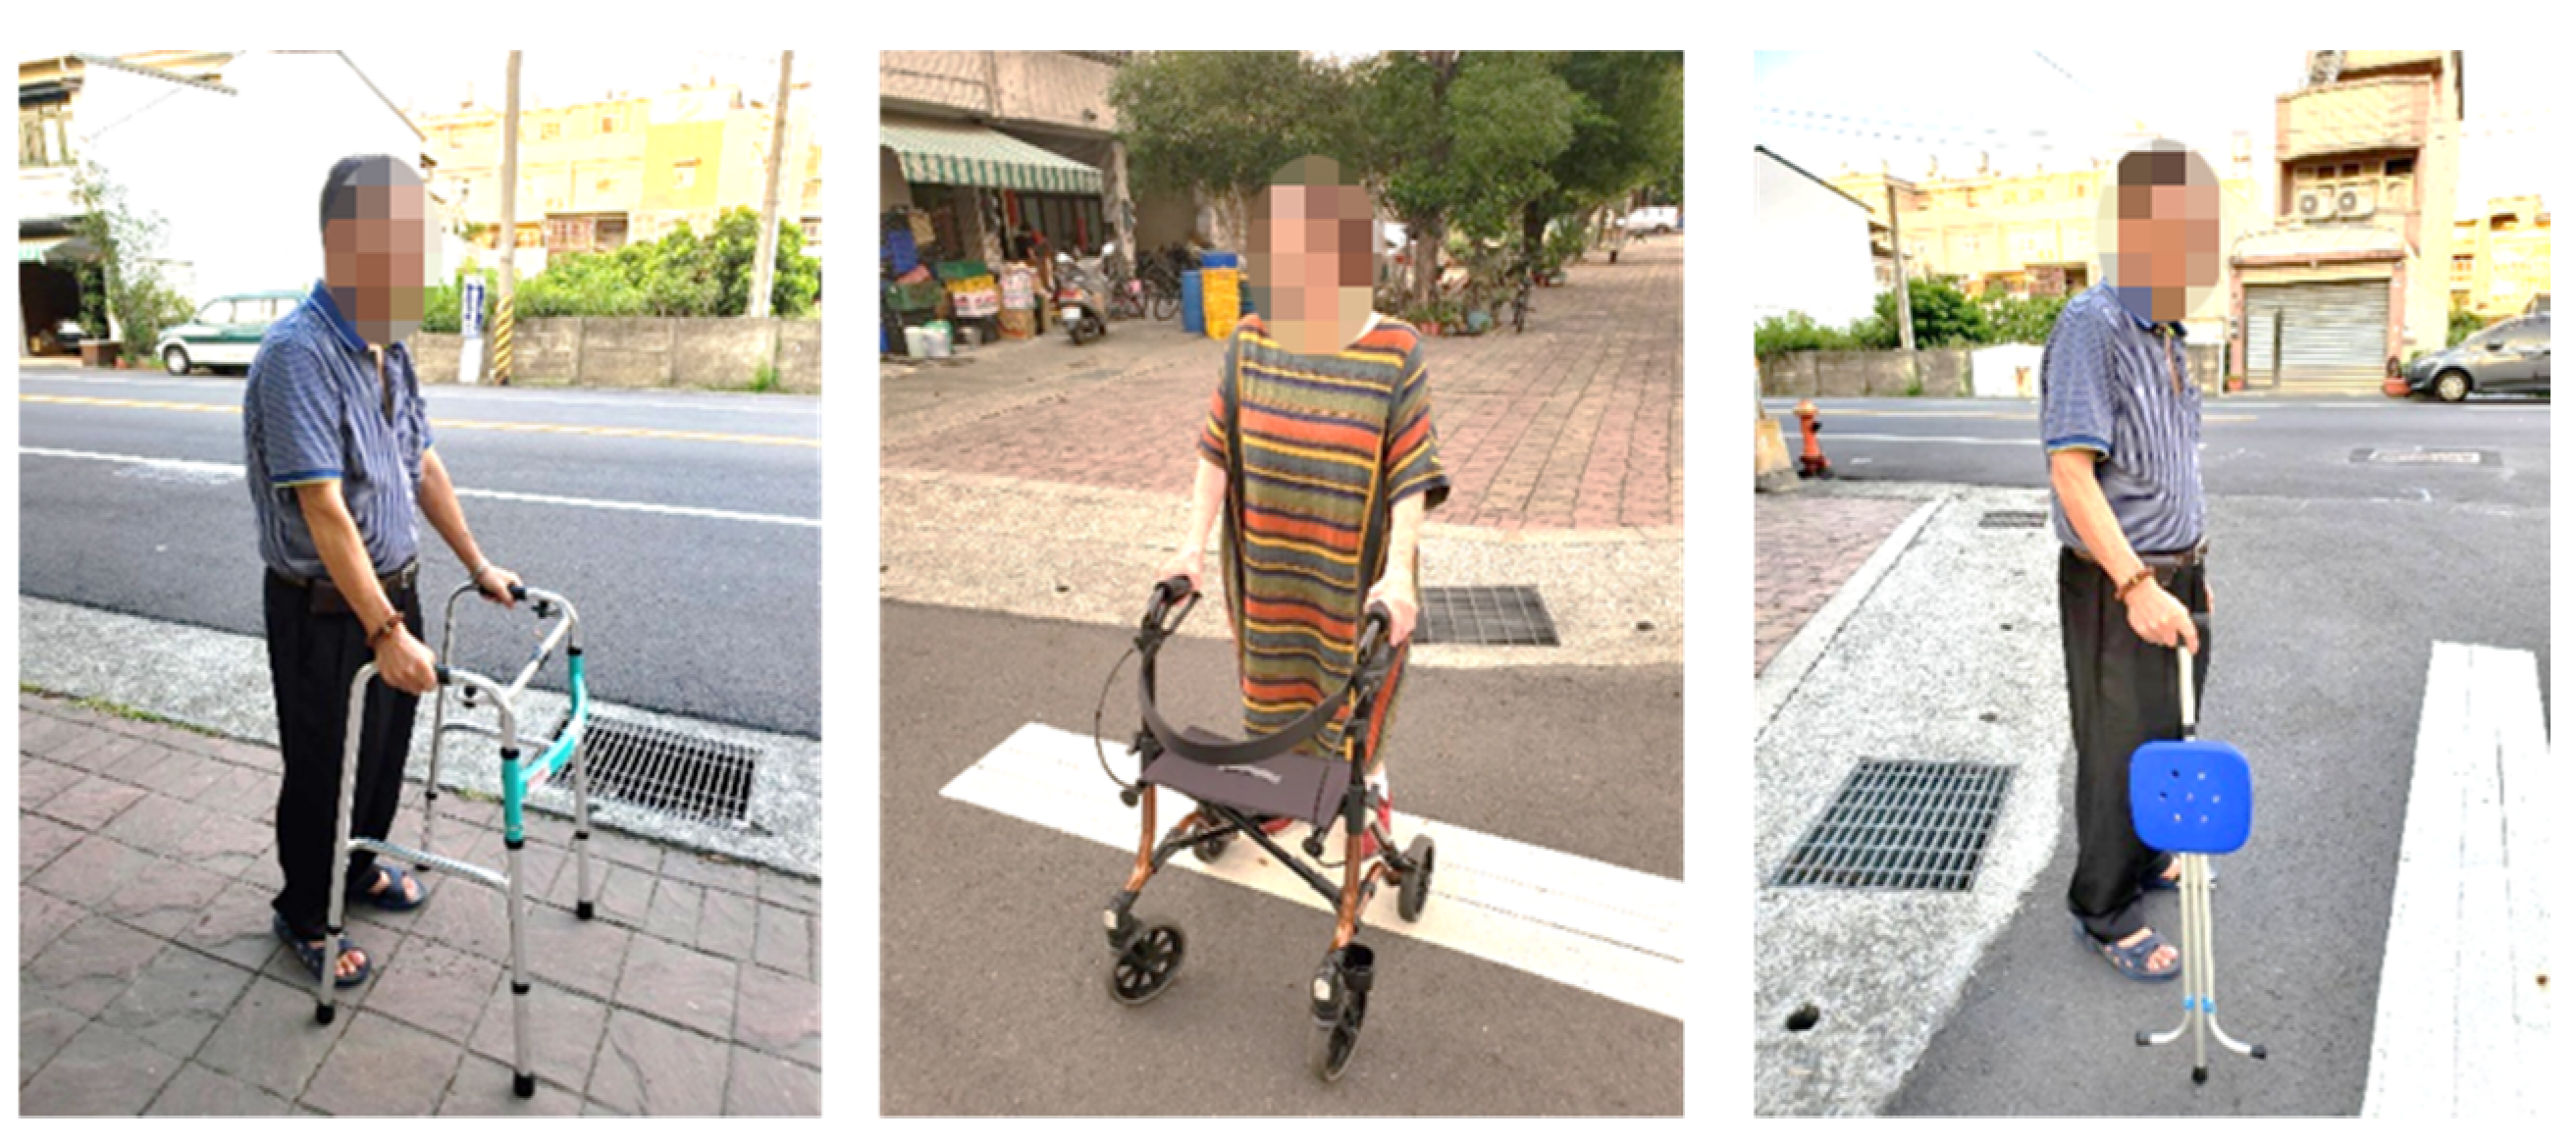 Colourful, stylish walking aid designs gain public attention - AT Today -  Assistive Technology